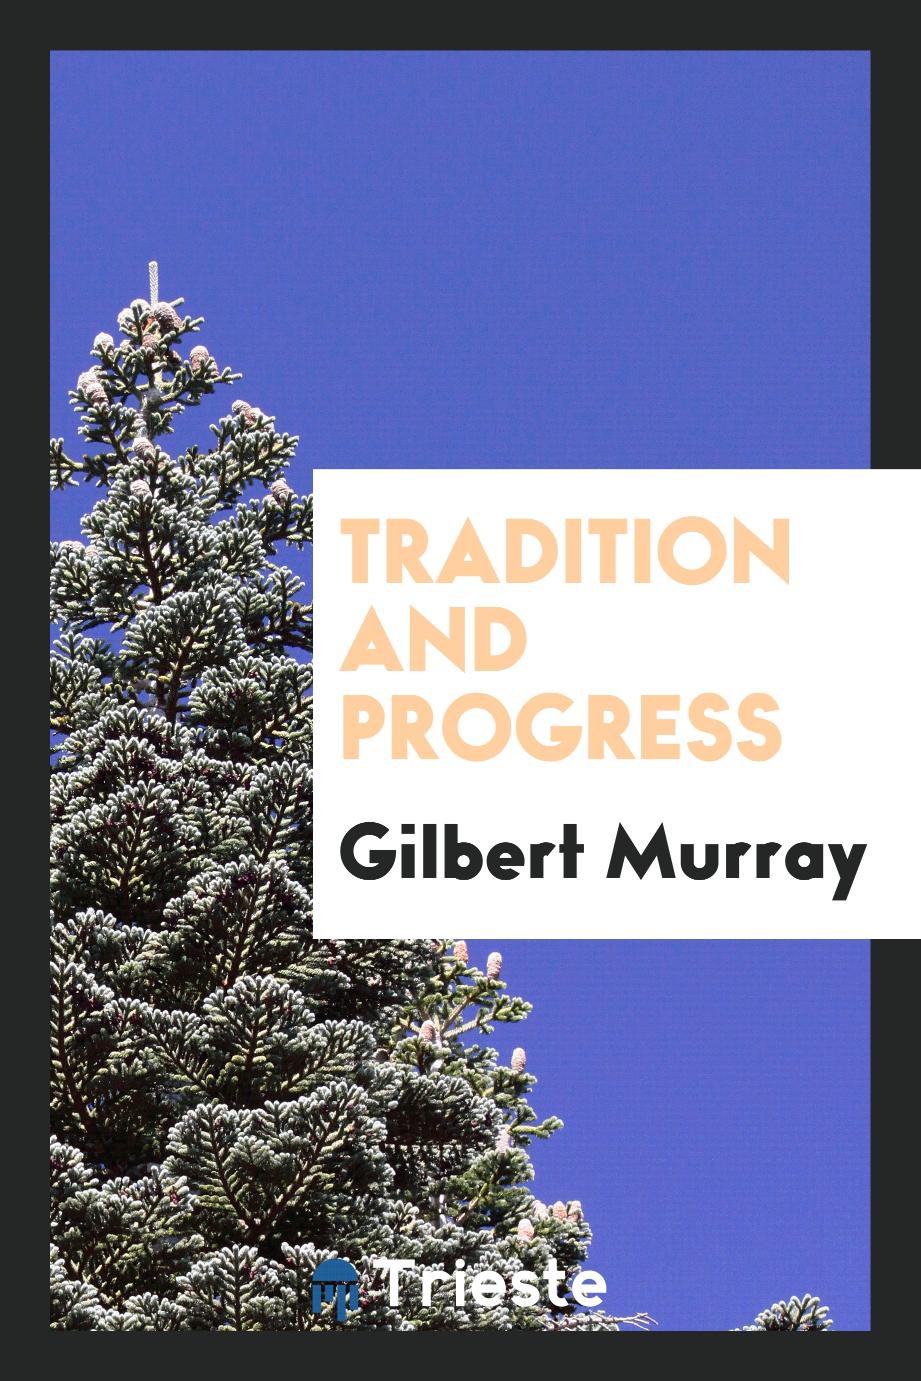 Tradition and progress